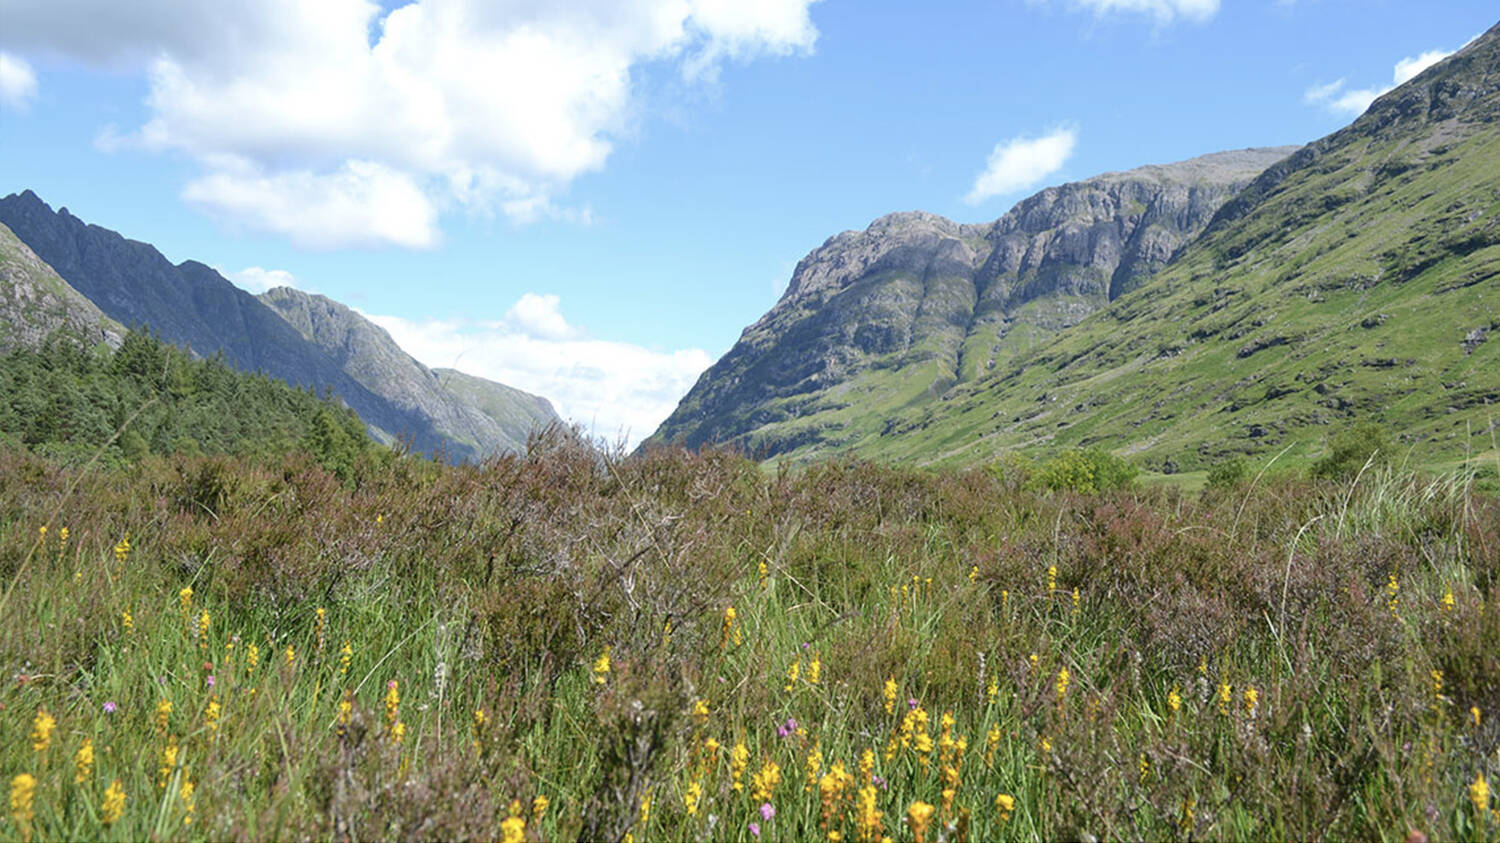 Glencoe in spring, with small yellow plants growing on the hillside in the foreground.